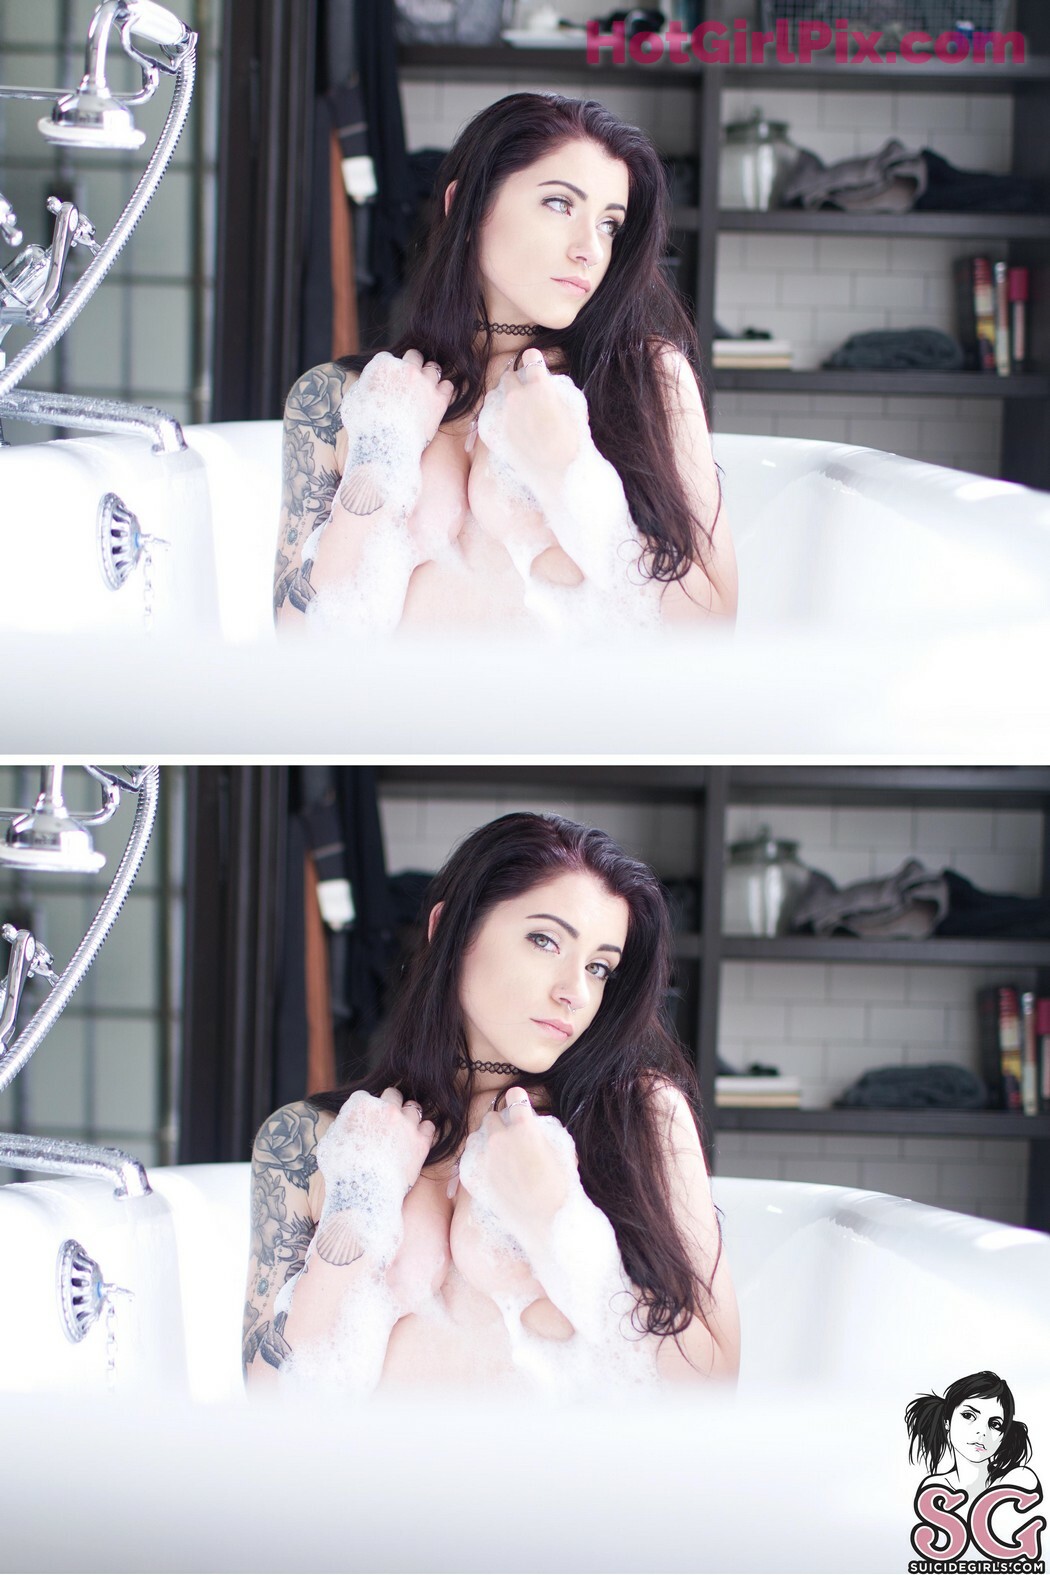 [Suicide Girls] Bea - Drowning My Demons